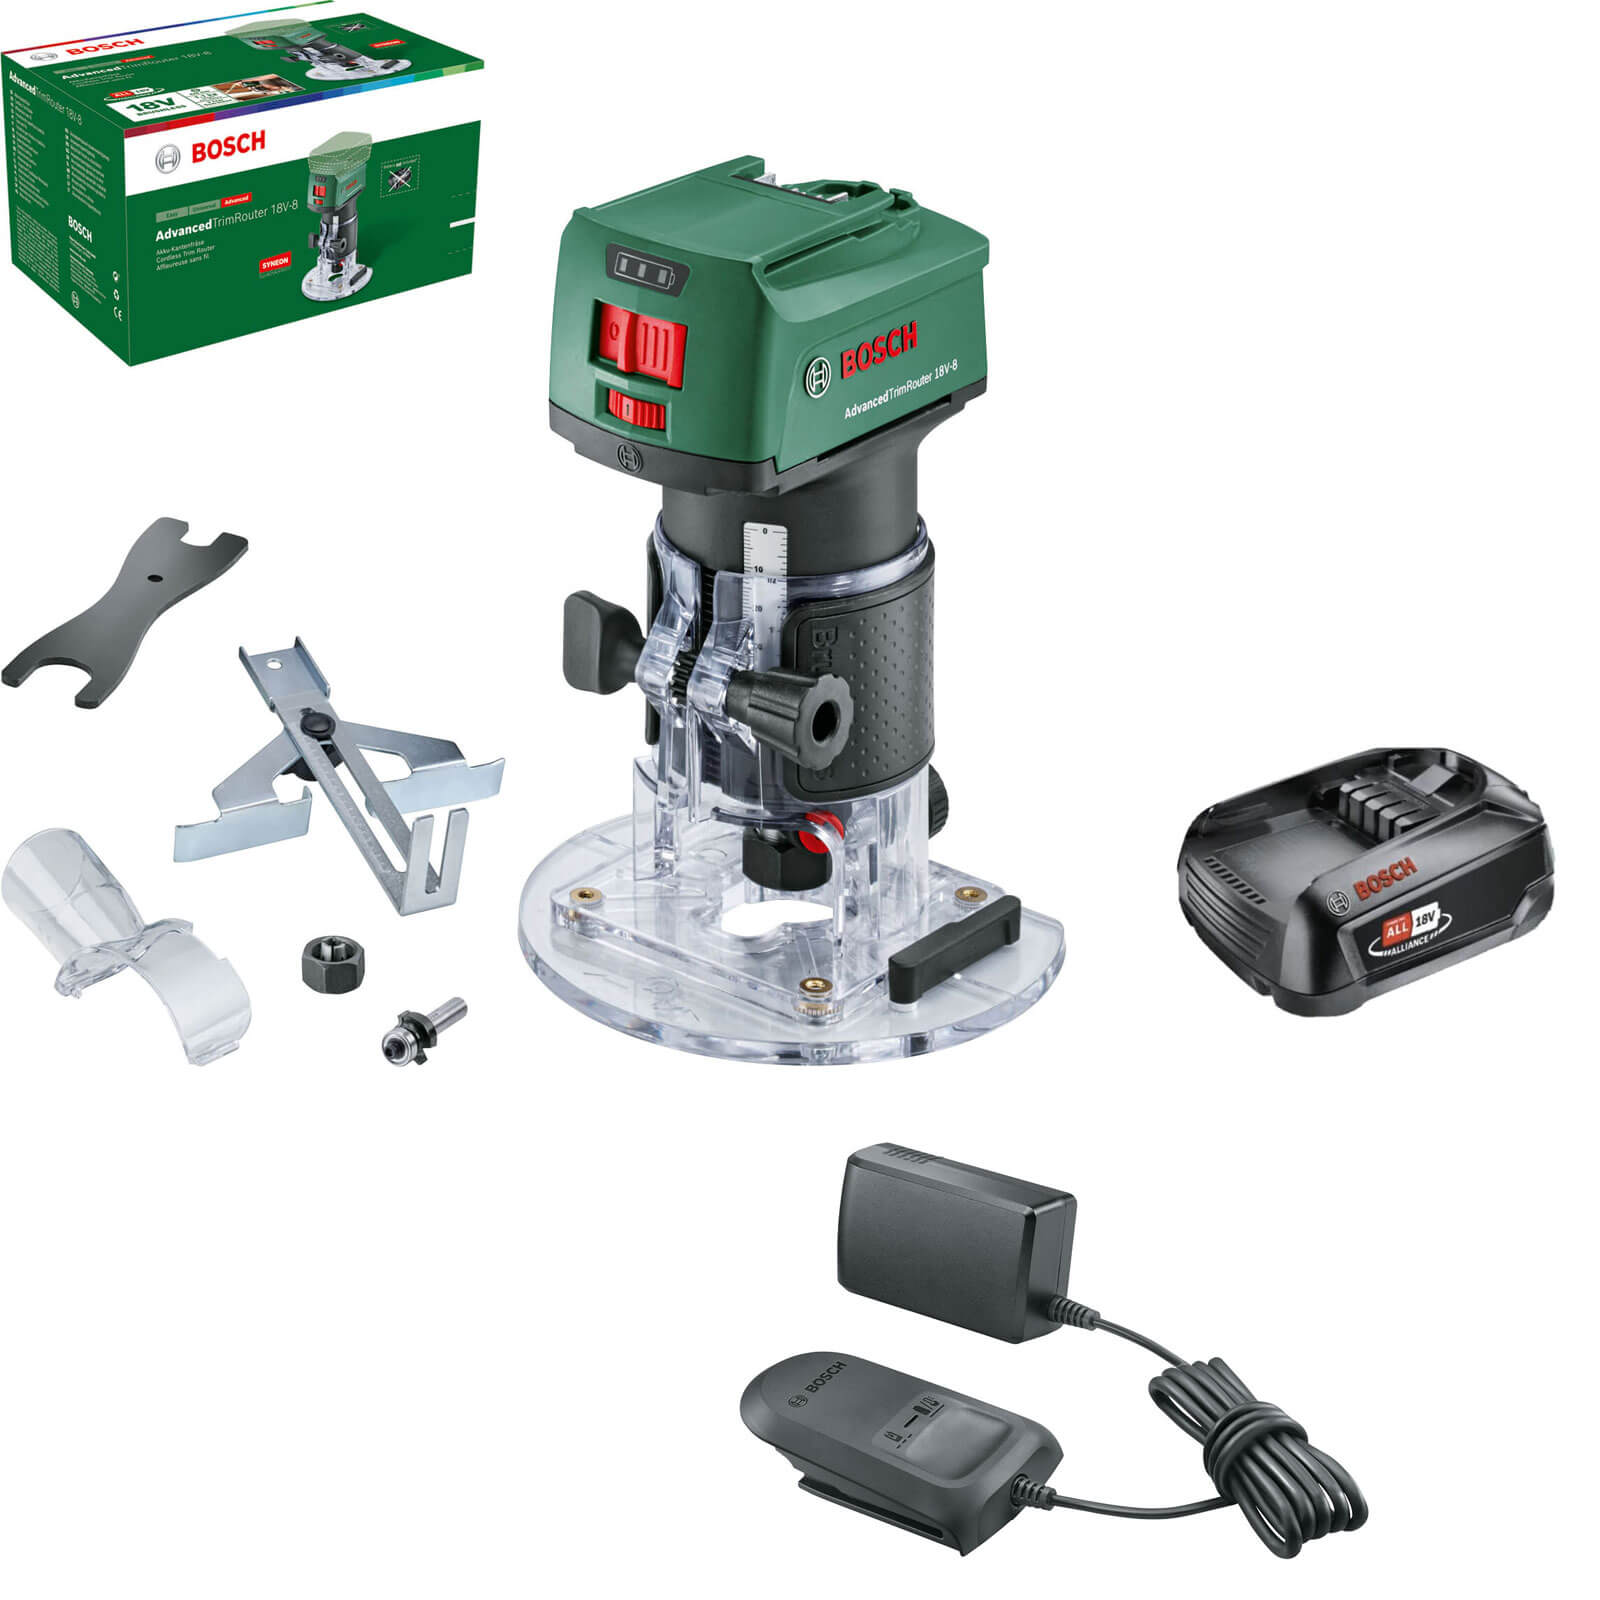 Bosch ADVANCEDTRIMROUTER 18V-8 P4A 18v Cordless Trim Router 1 x 1.5ah Li-ion Charger No Case FREE UK 1/4" Collet Worth £11.95 Extra !